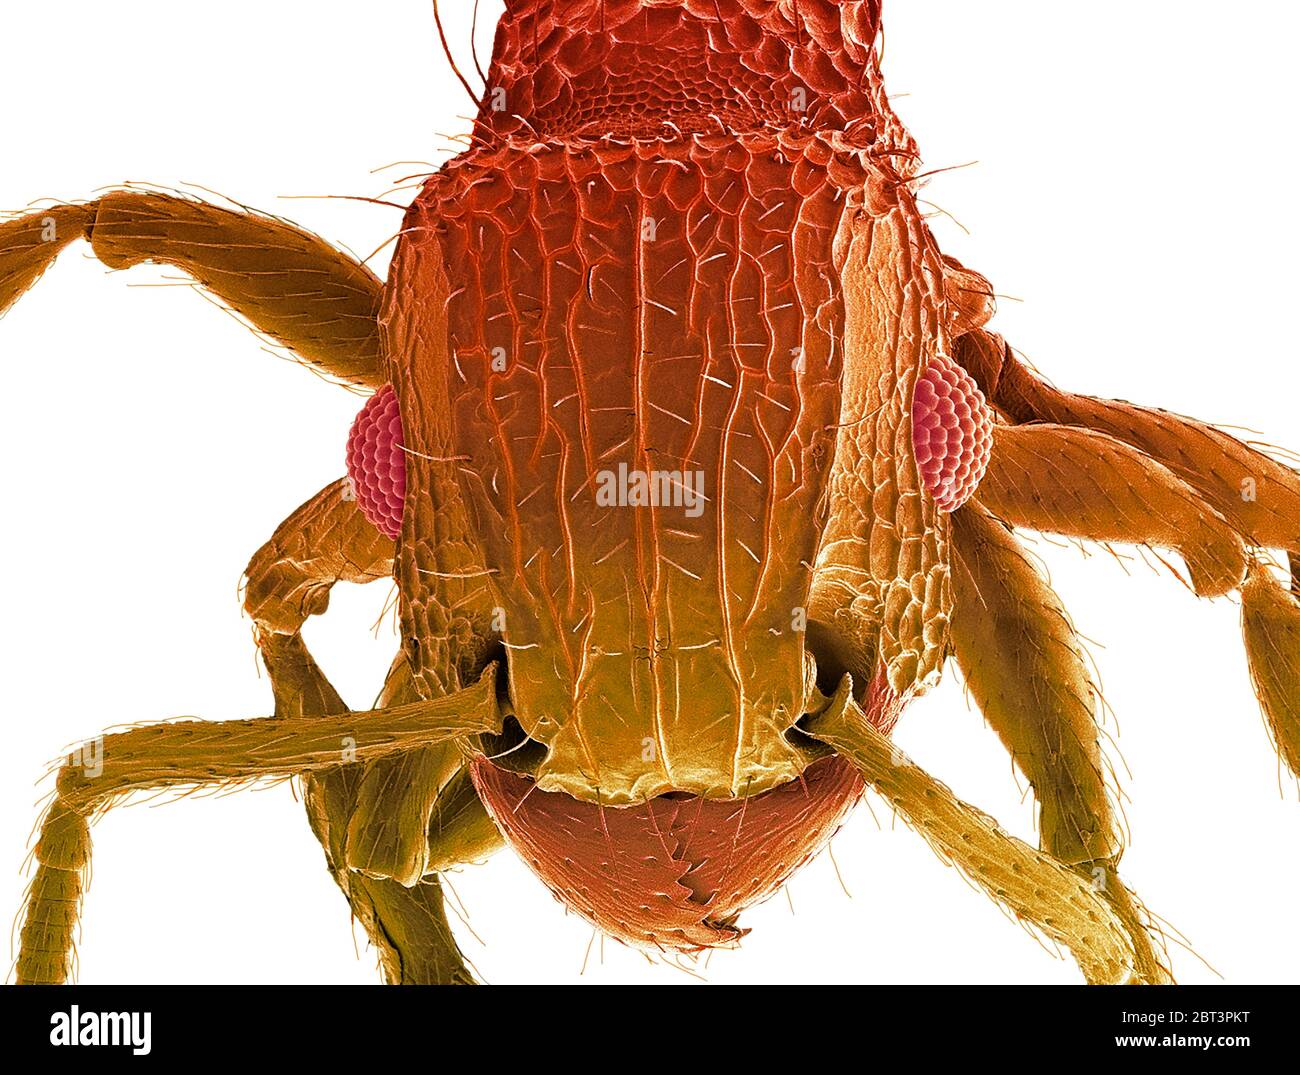 Ant head. Coloured scanning electron micrograph (SEM) of the head of an ant (family Formicidae). showing its large compound eyes (red) and jaws. Magnification: x50 when printed 10 centimetres wide. Stock Photo